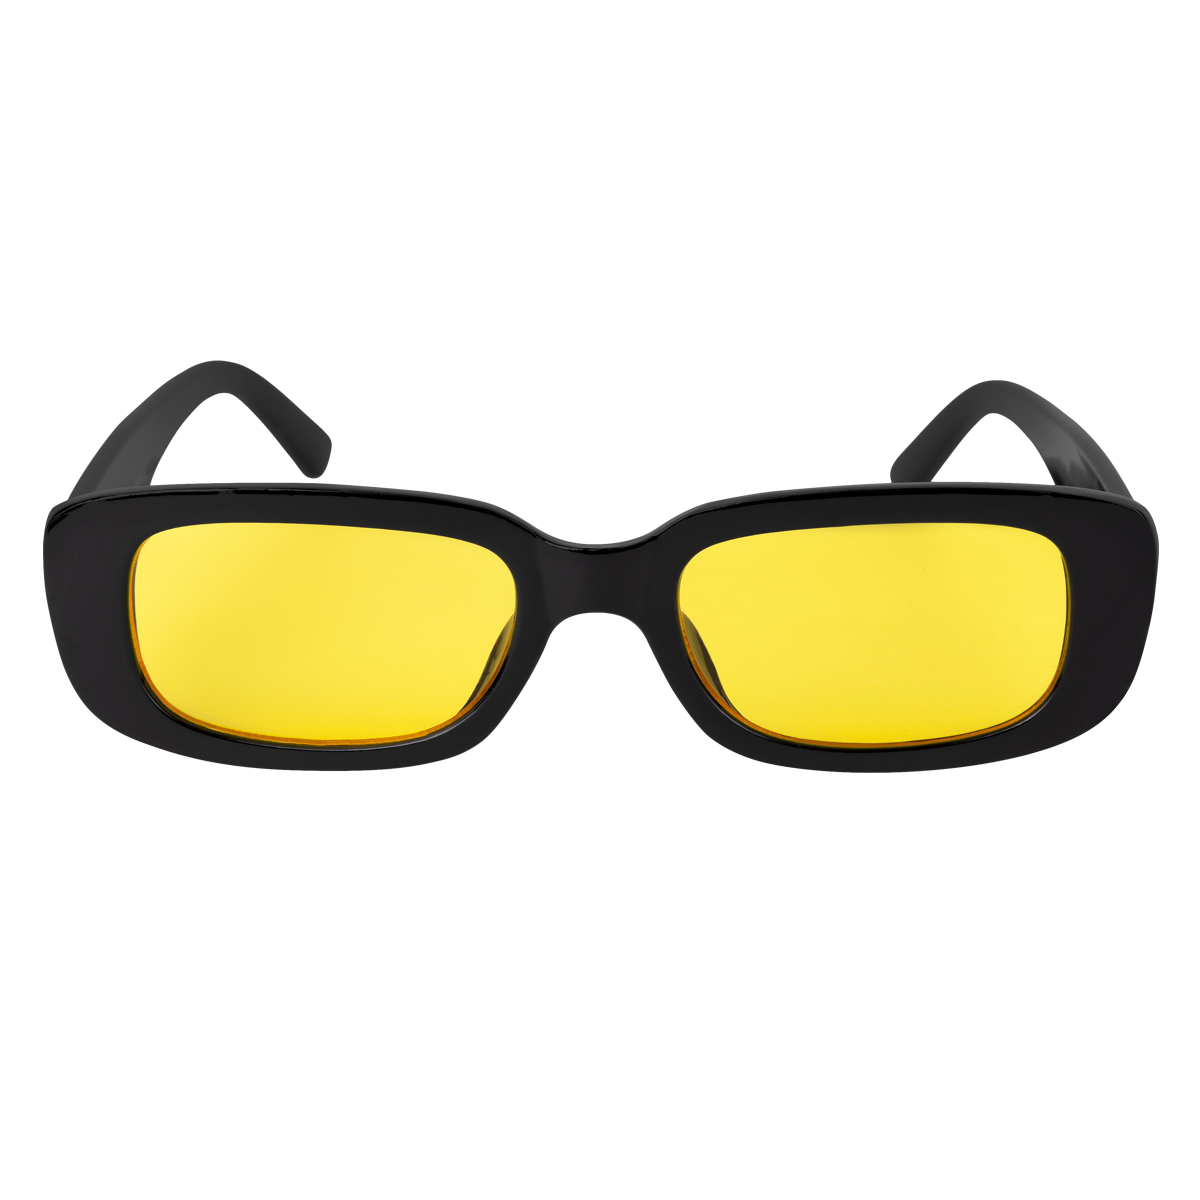 Downtown Sunglasses in Black/Yellow